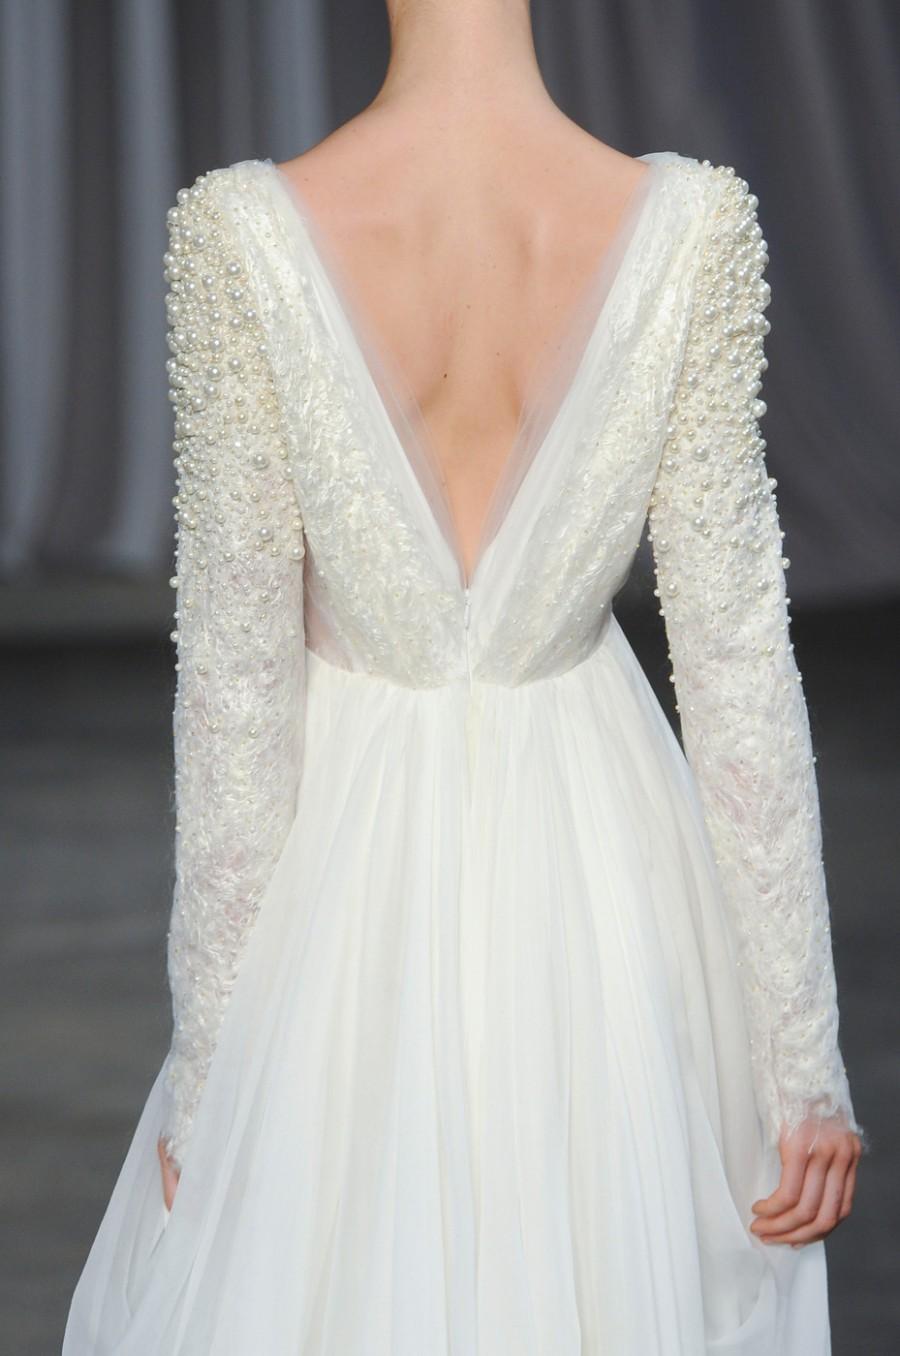 Wedding - Wedding gown with freshwater pearls for Jeyne Westerling - Christian Siriano spring 2013